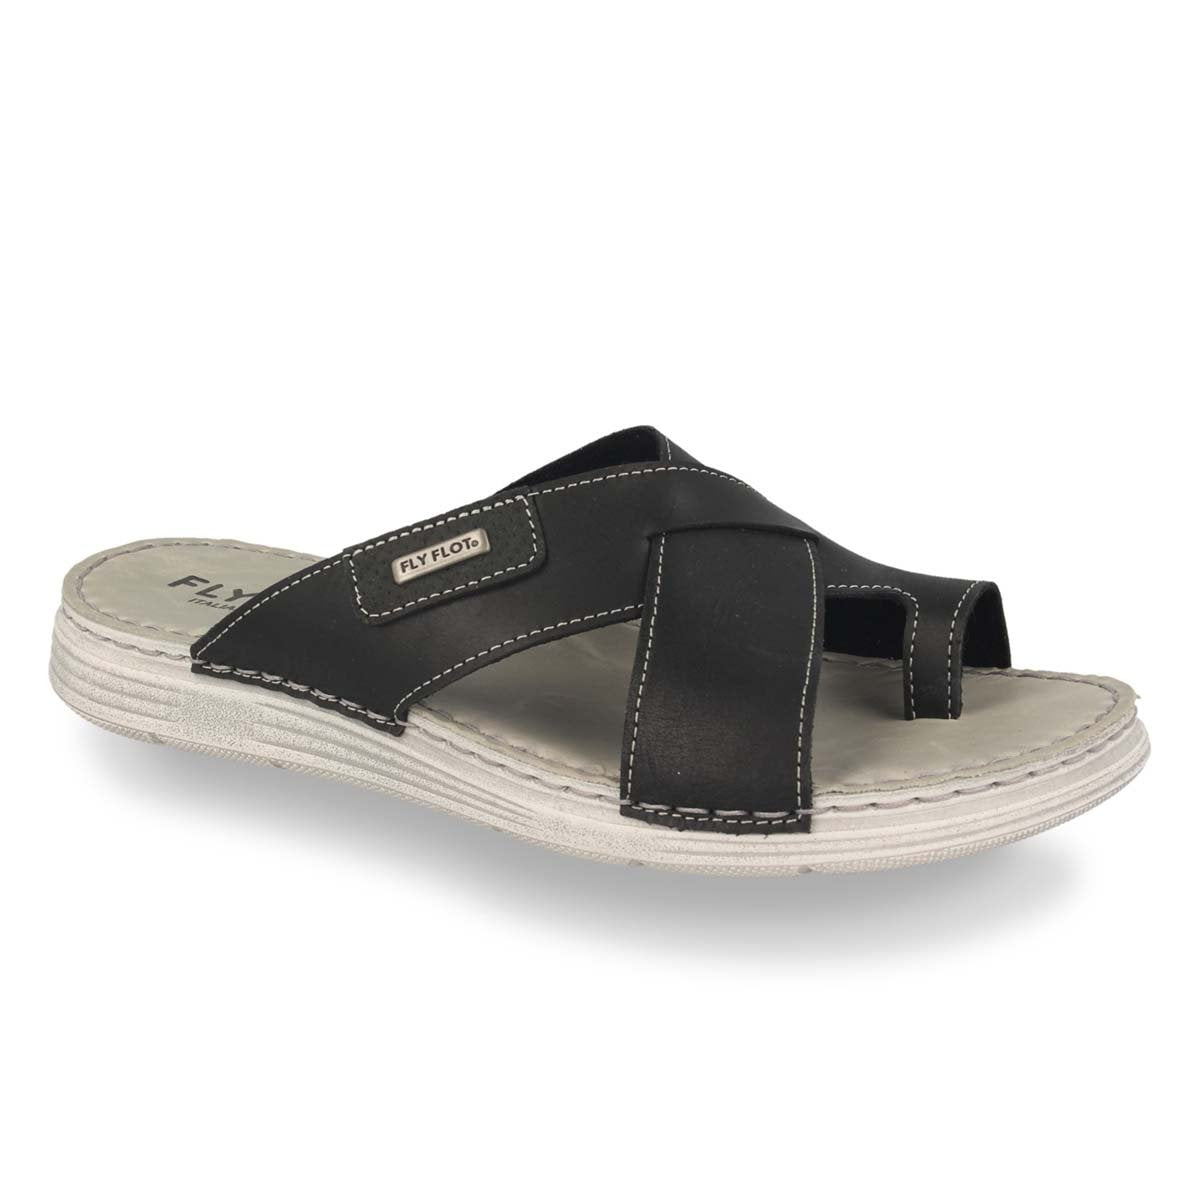 See the Trendy Leather Slide Men Sandals in the colour BLACK, available in various sizes